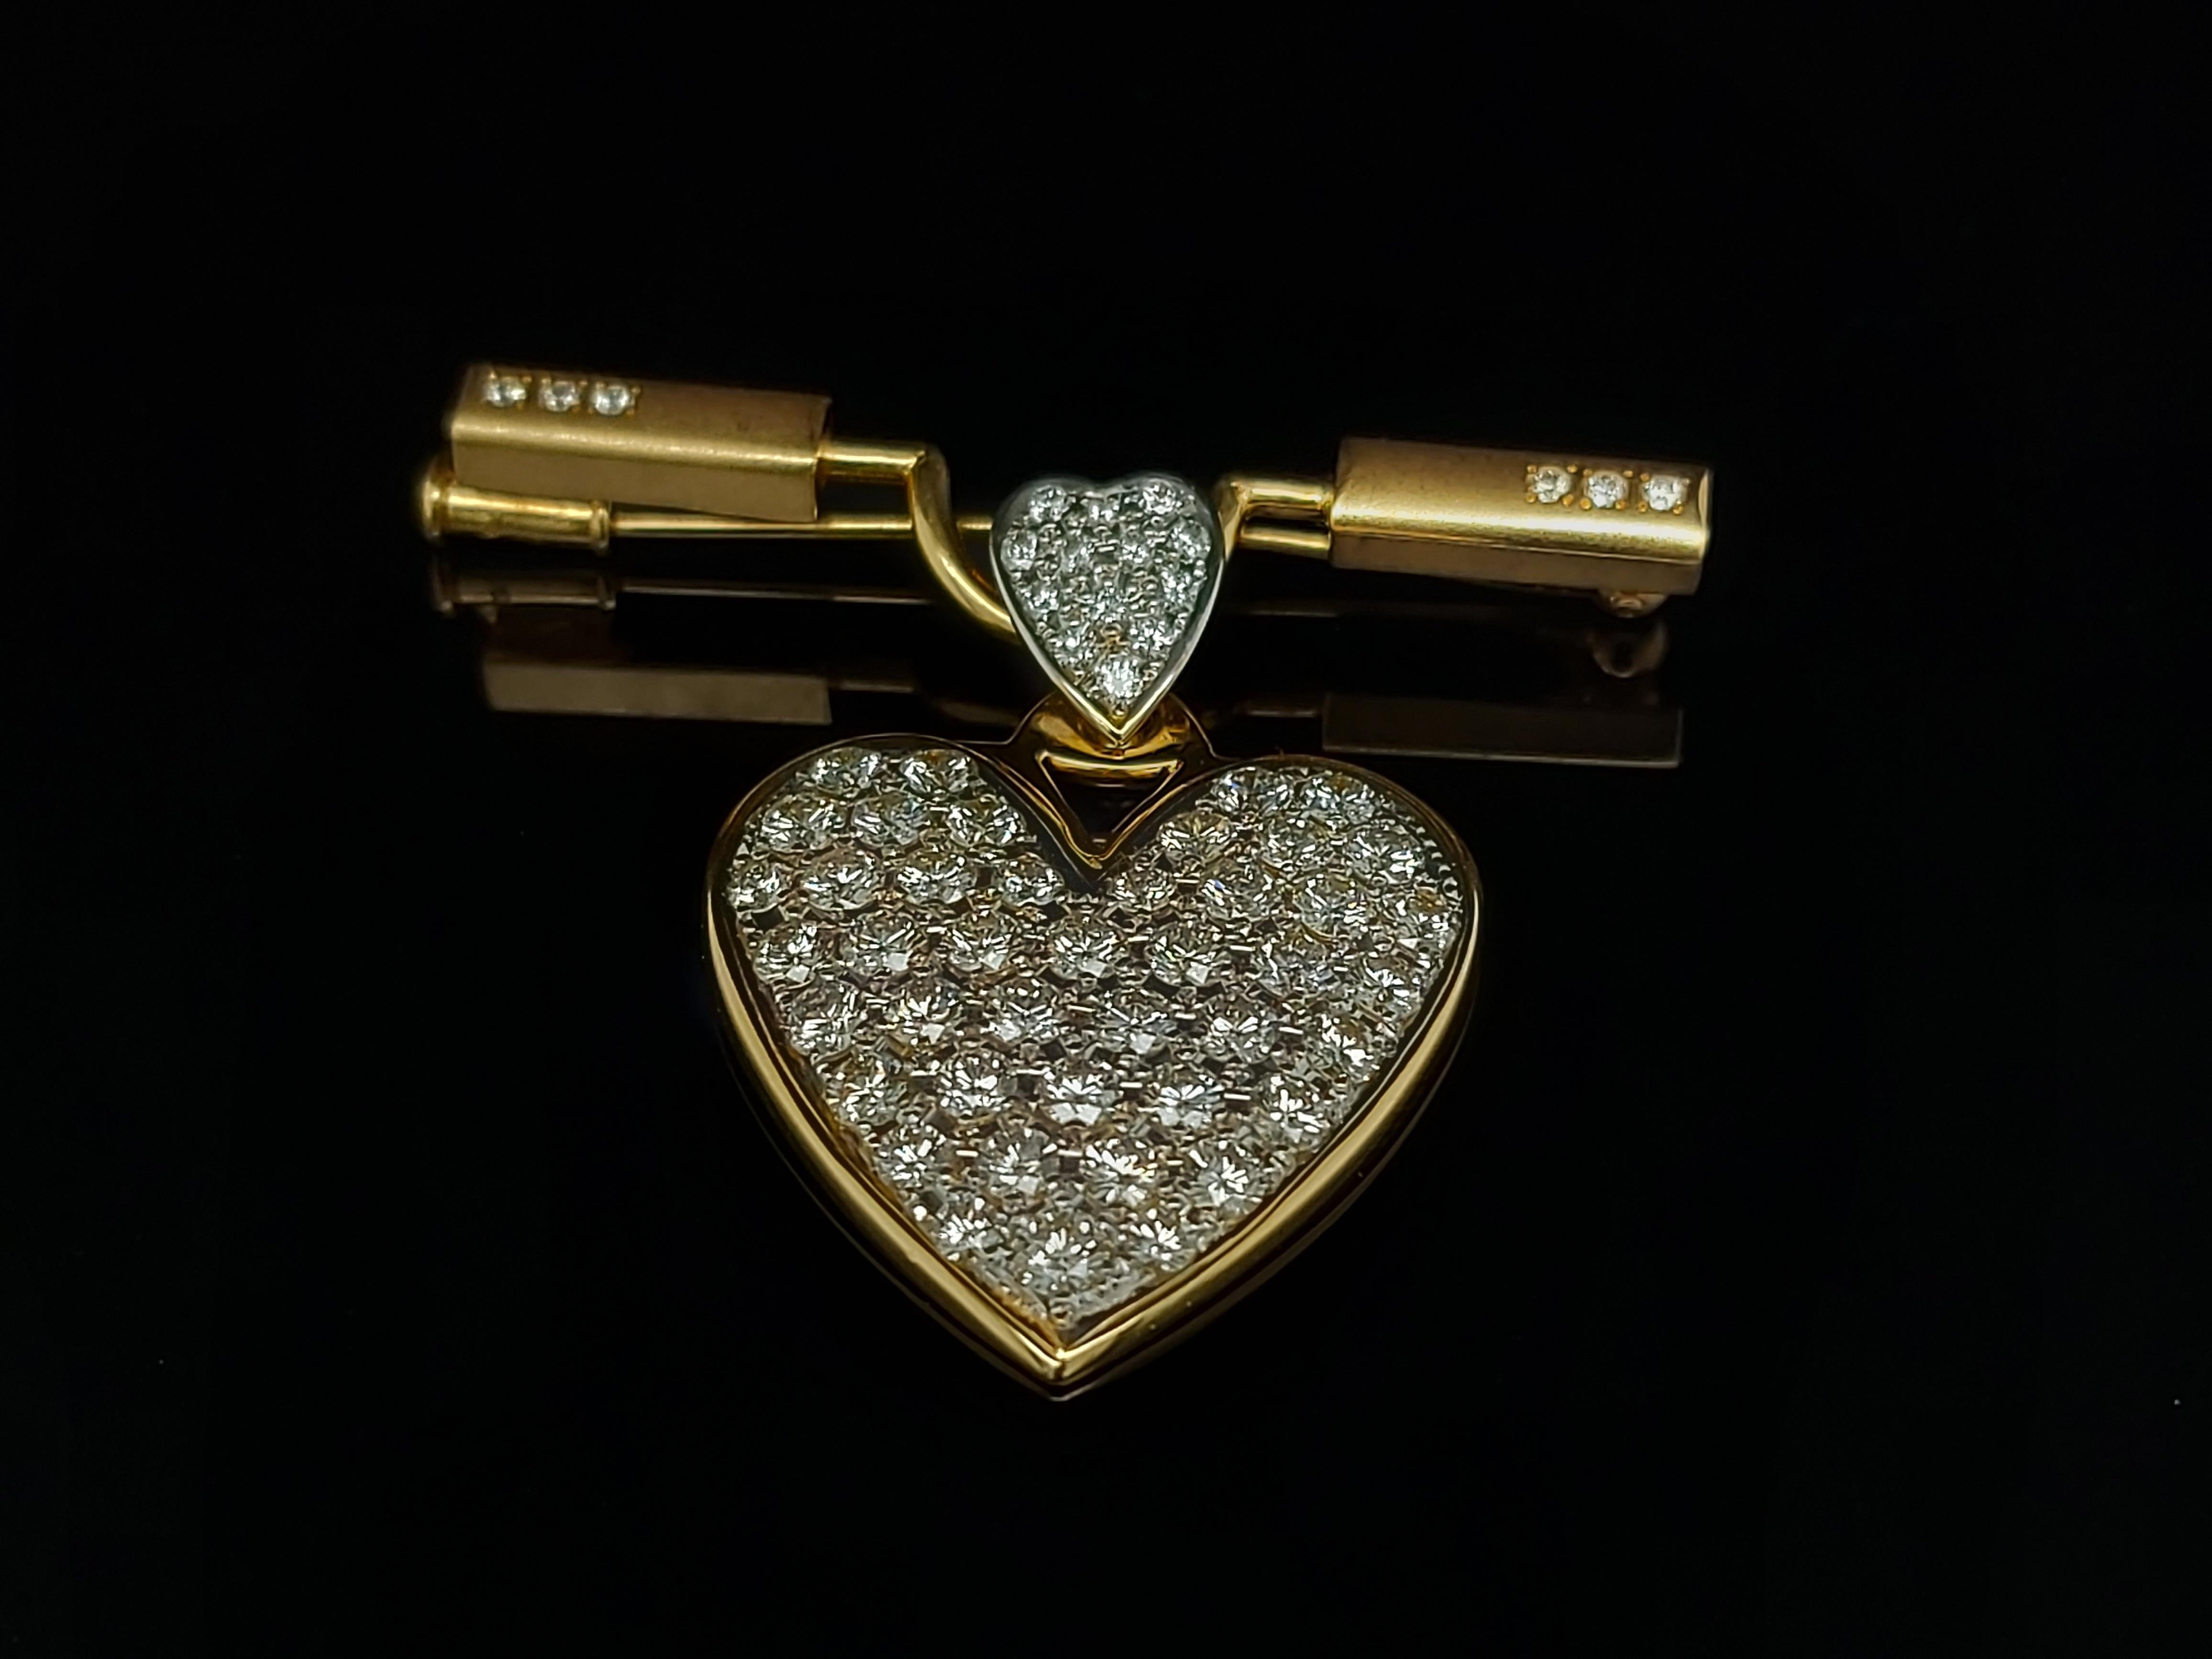 Stunning Yellow Gold Brooch with Diamond Heart Pavé diamonds set Dangling Down

Diamonds: Brilliants cut diamonds together 2.54ct D/E Loupe clean/VVS Top quality

Material: 18 kt solid yellow gold

Total weight: 19.5 gram / 0.685 oz / 12.5 dwt